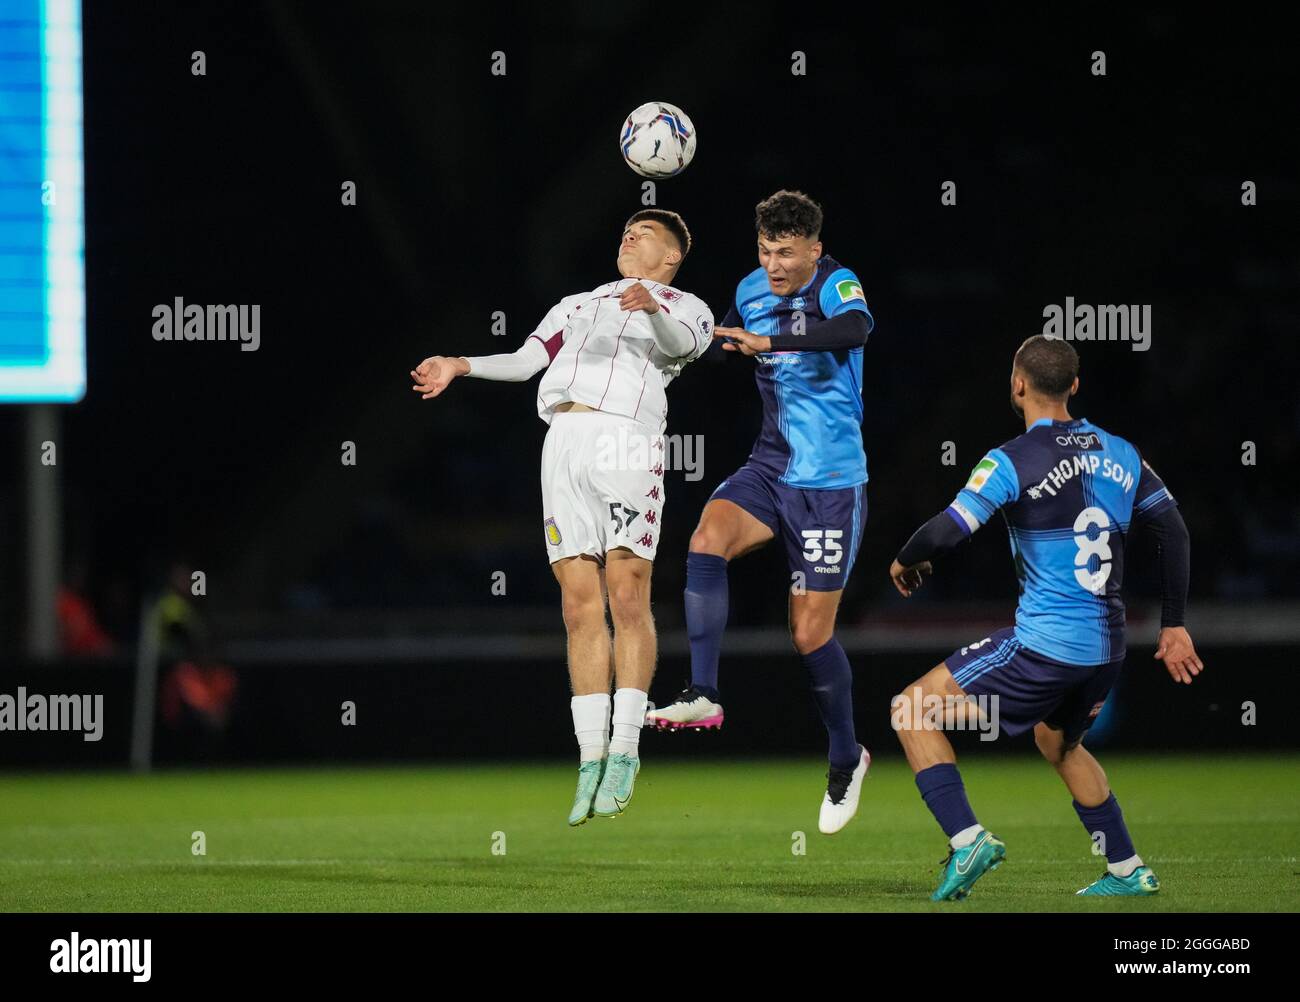 High Wycombe, UK. 31st Aug, 2021. Max Ram of Wycombe Wanderers & Taylor Jay-Hart of Aston Villa U21 during the EFL Trophy match between Wycombe Wanderers and Aston Villa U21 at Adams Park, High Wycombe, England on 31 August 2021. Photo by Andy Rowland. Credit: PRiME Media Images/Alamy Live News Stock Photo